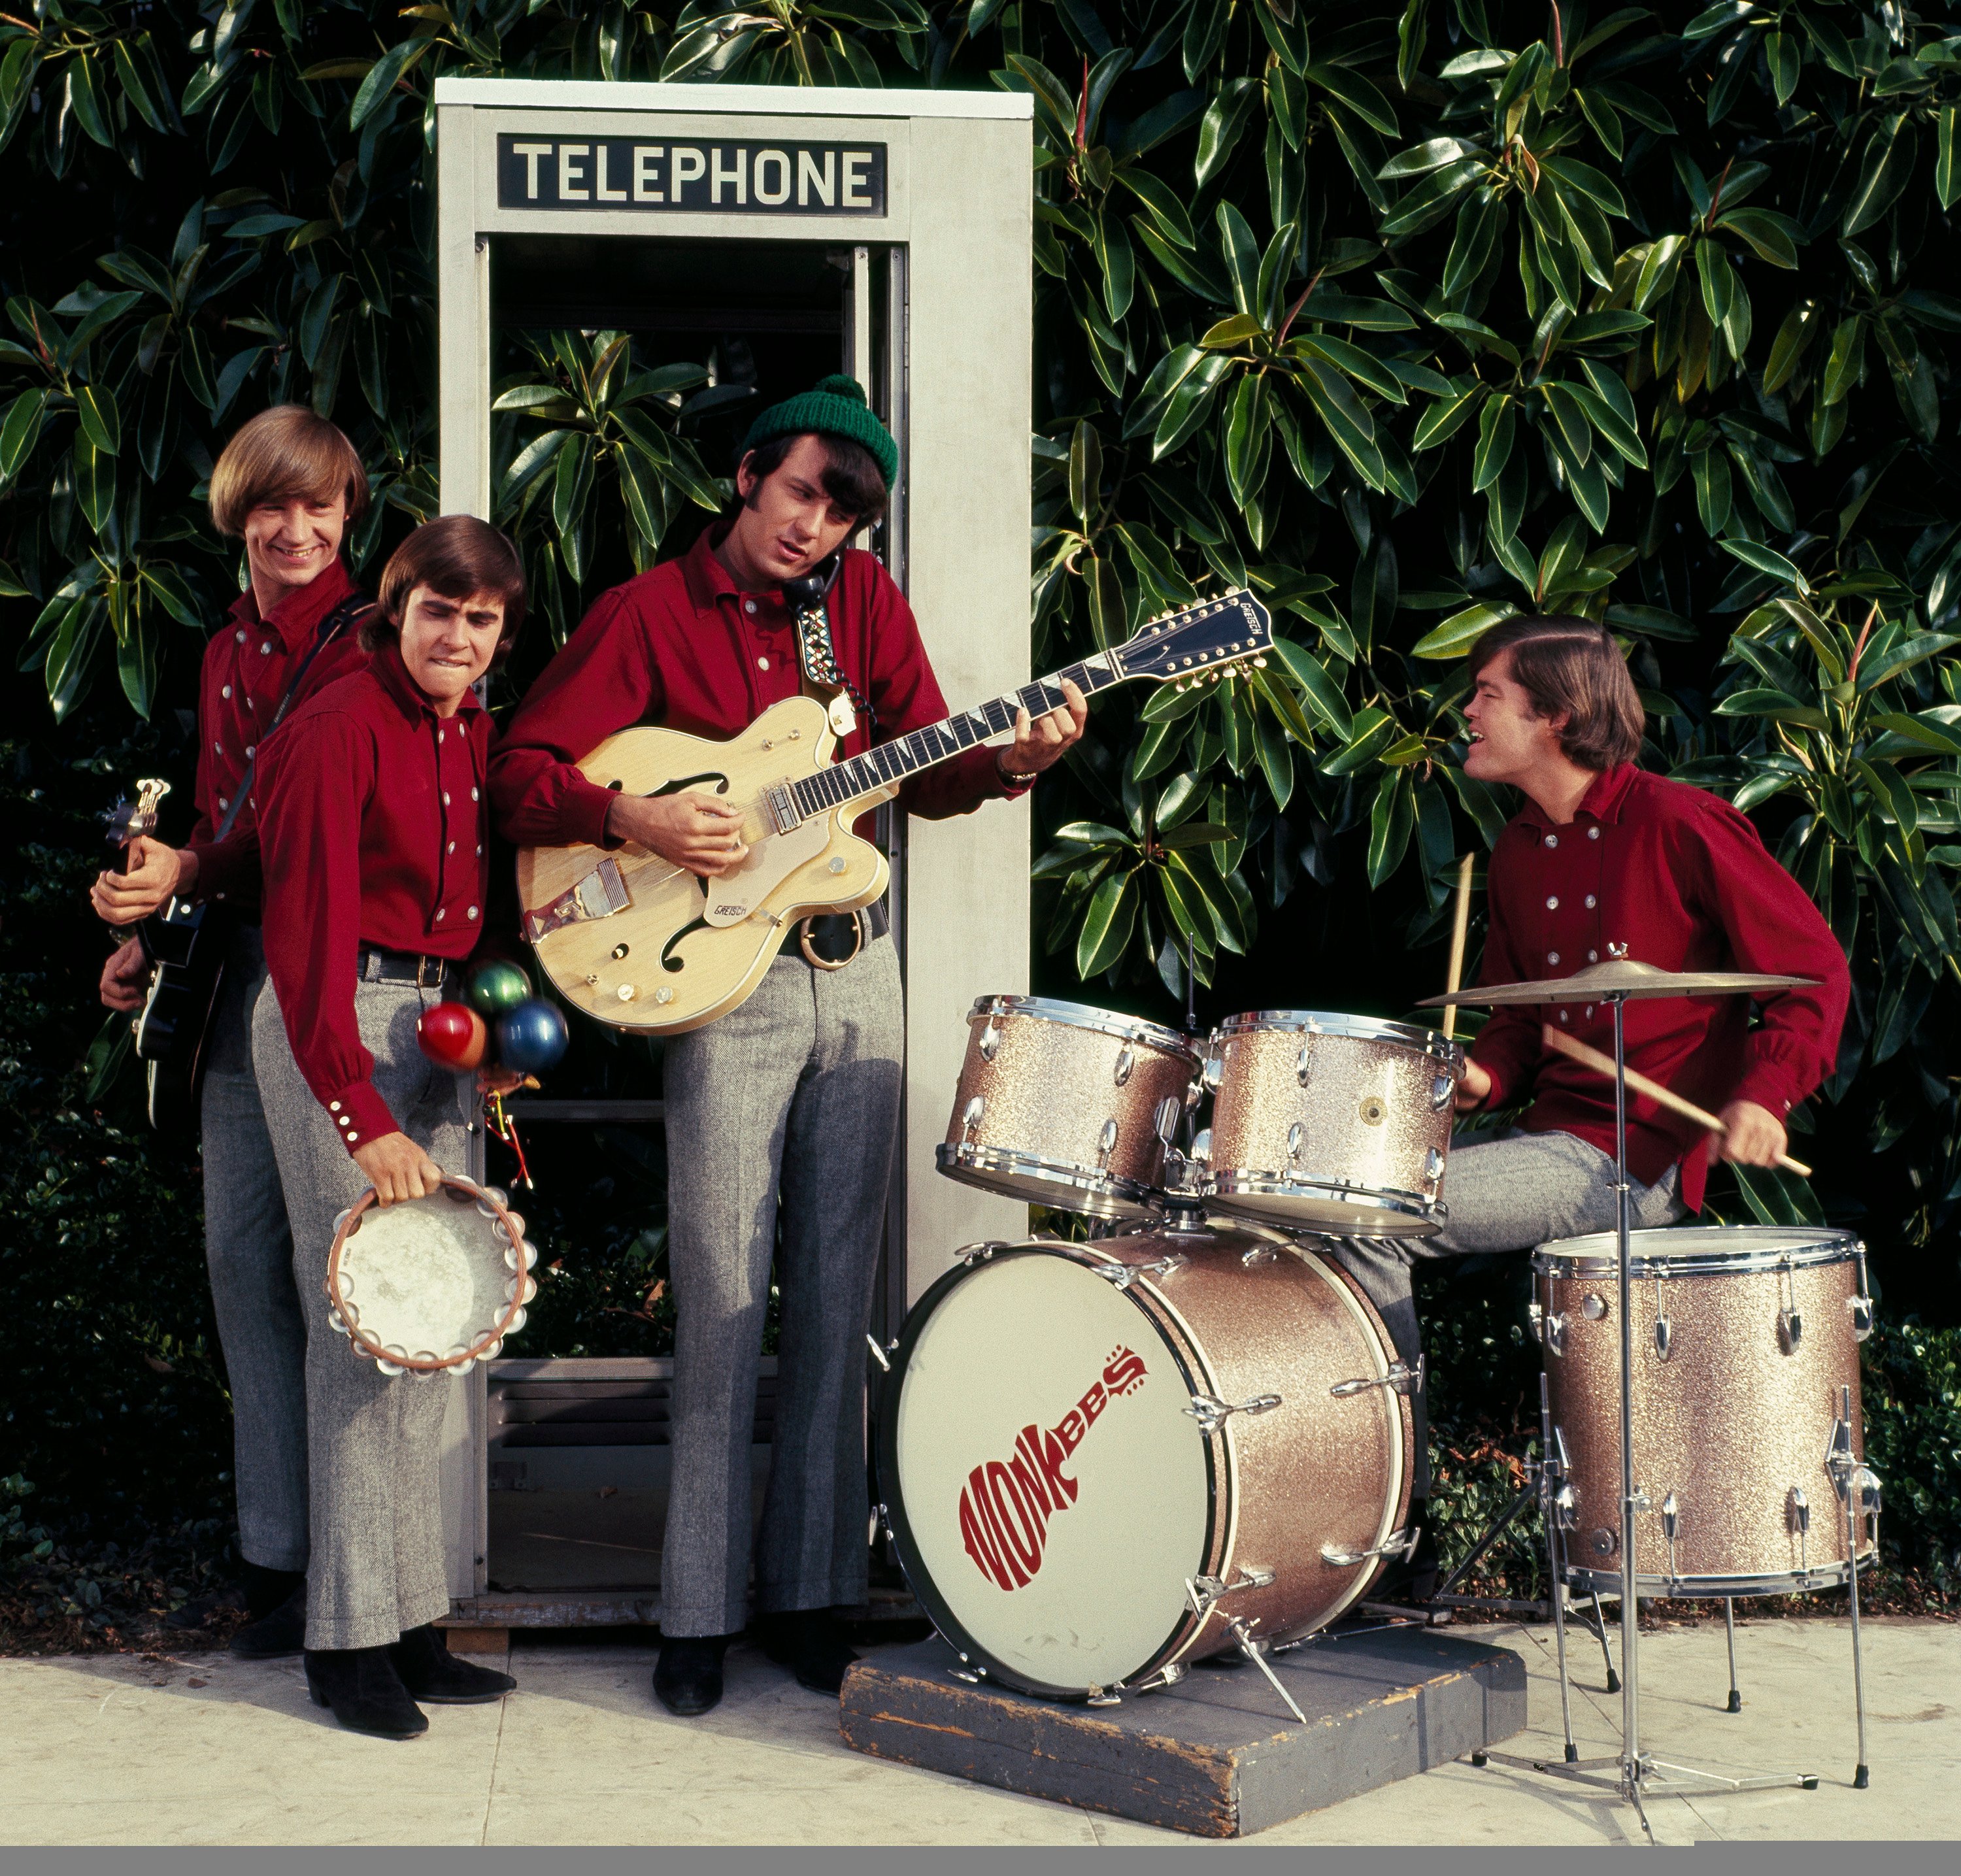 The Monkees' Peter Tork, Davy Jones, Mike Nesmith, and Micky Dolenz playing songs near plants